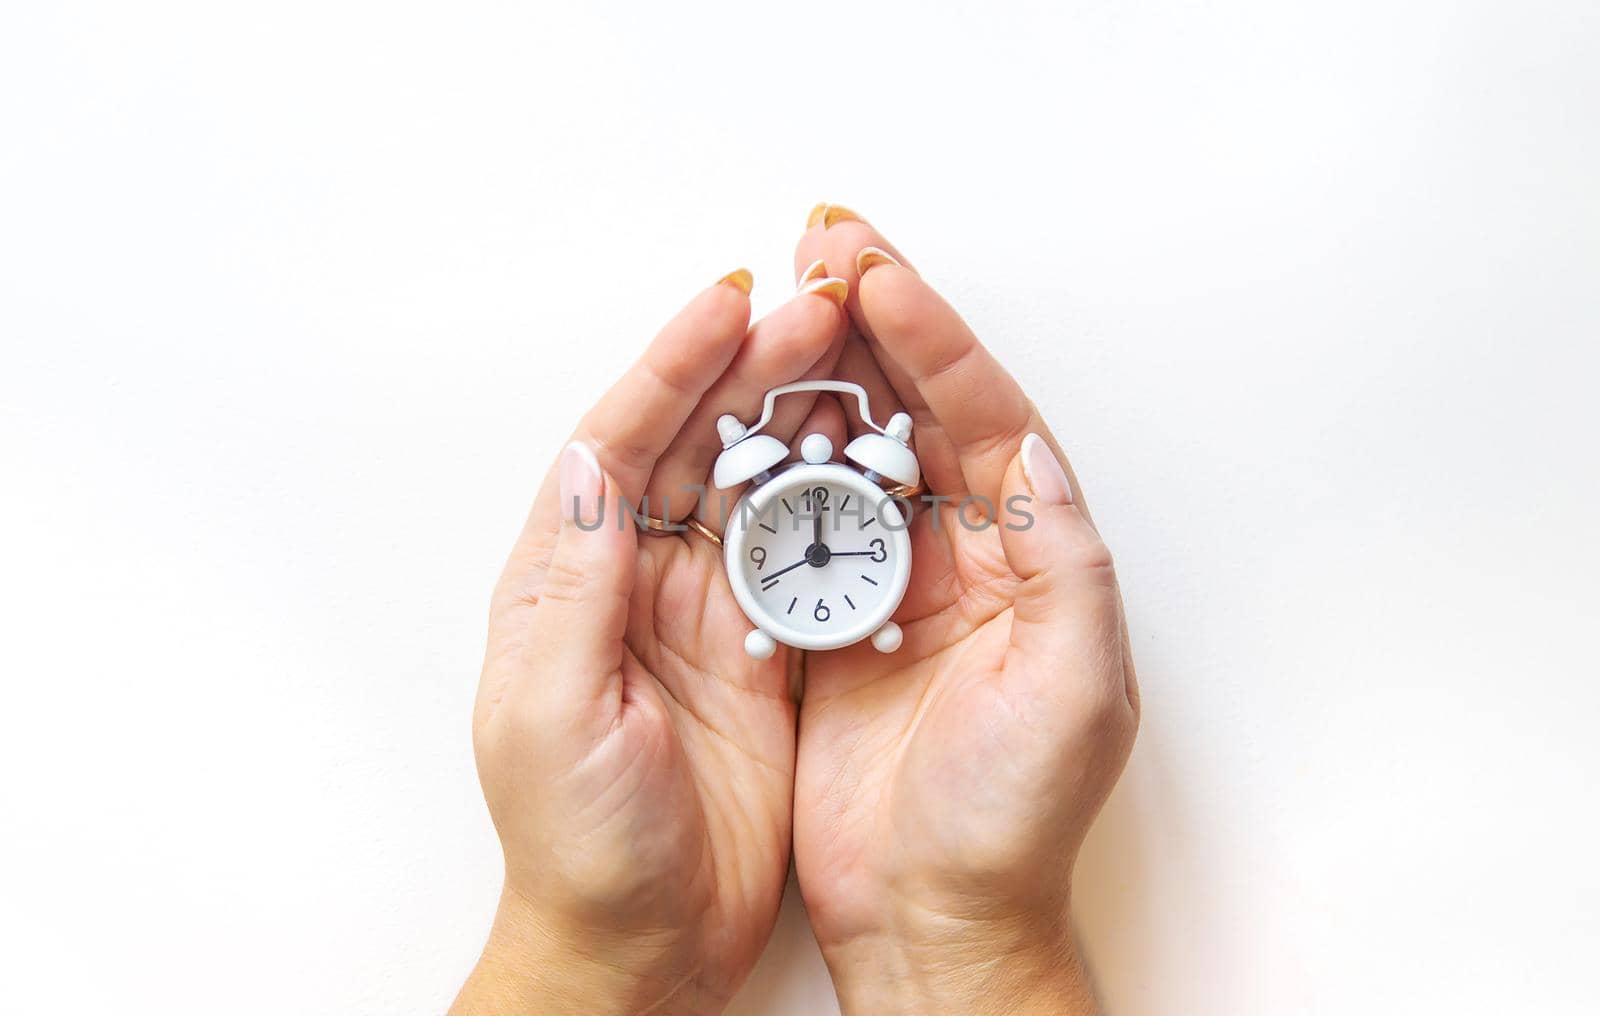 Alarm clock in hands on a white background. Selective focus. by mila1784